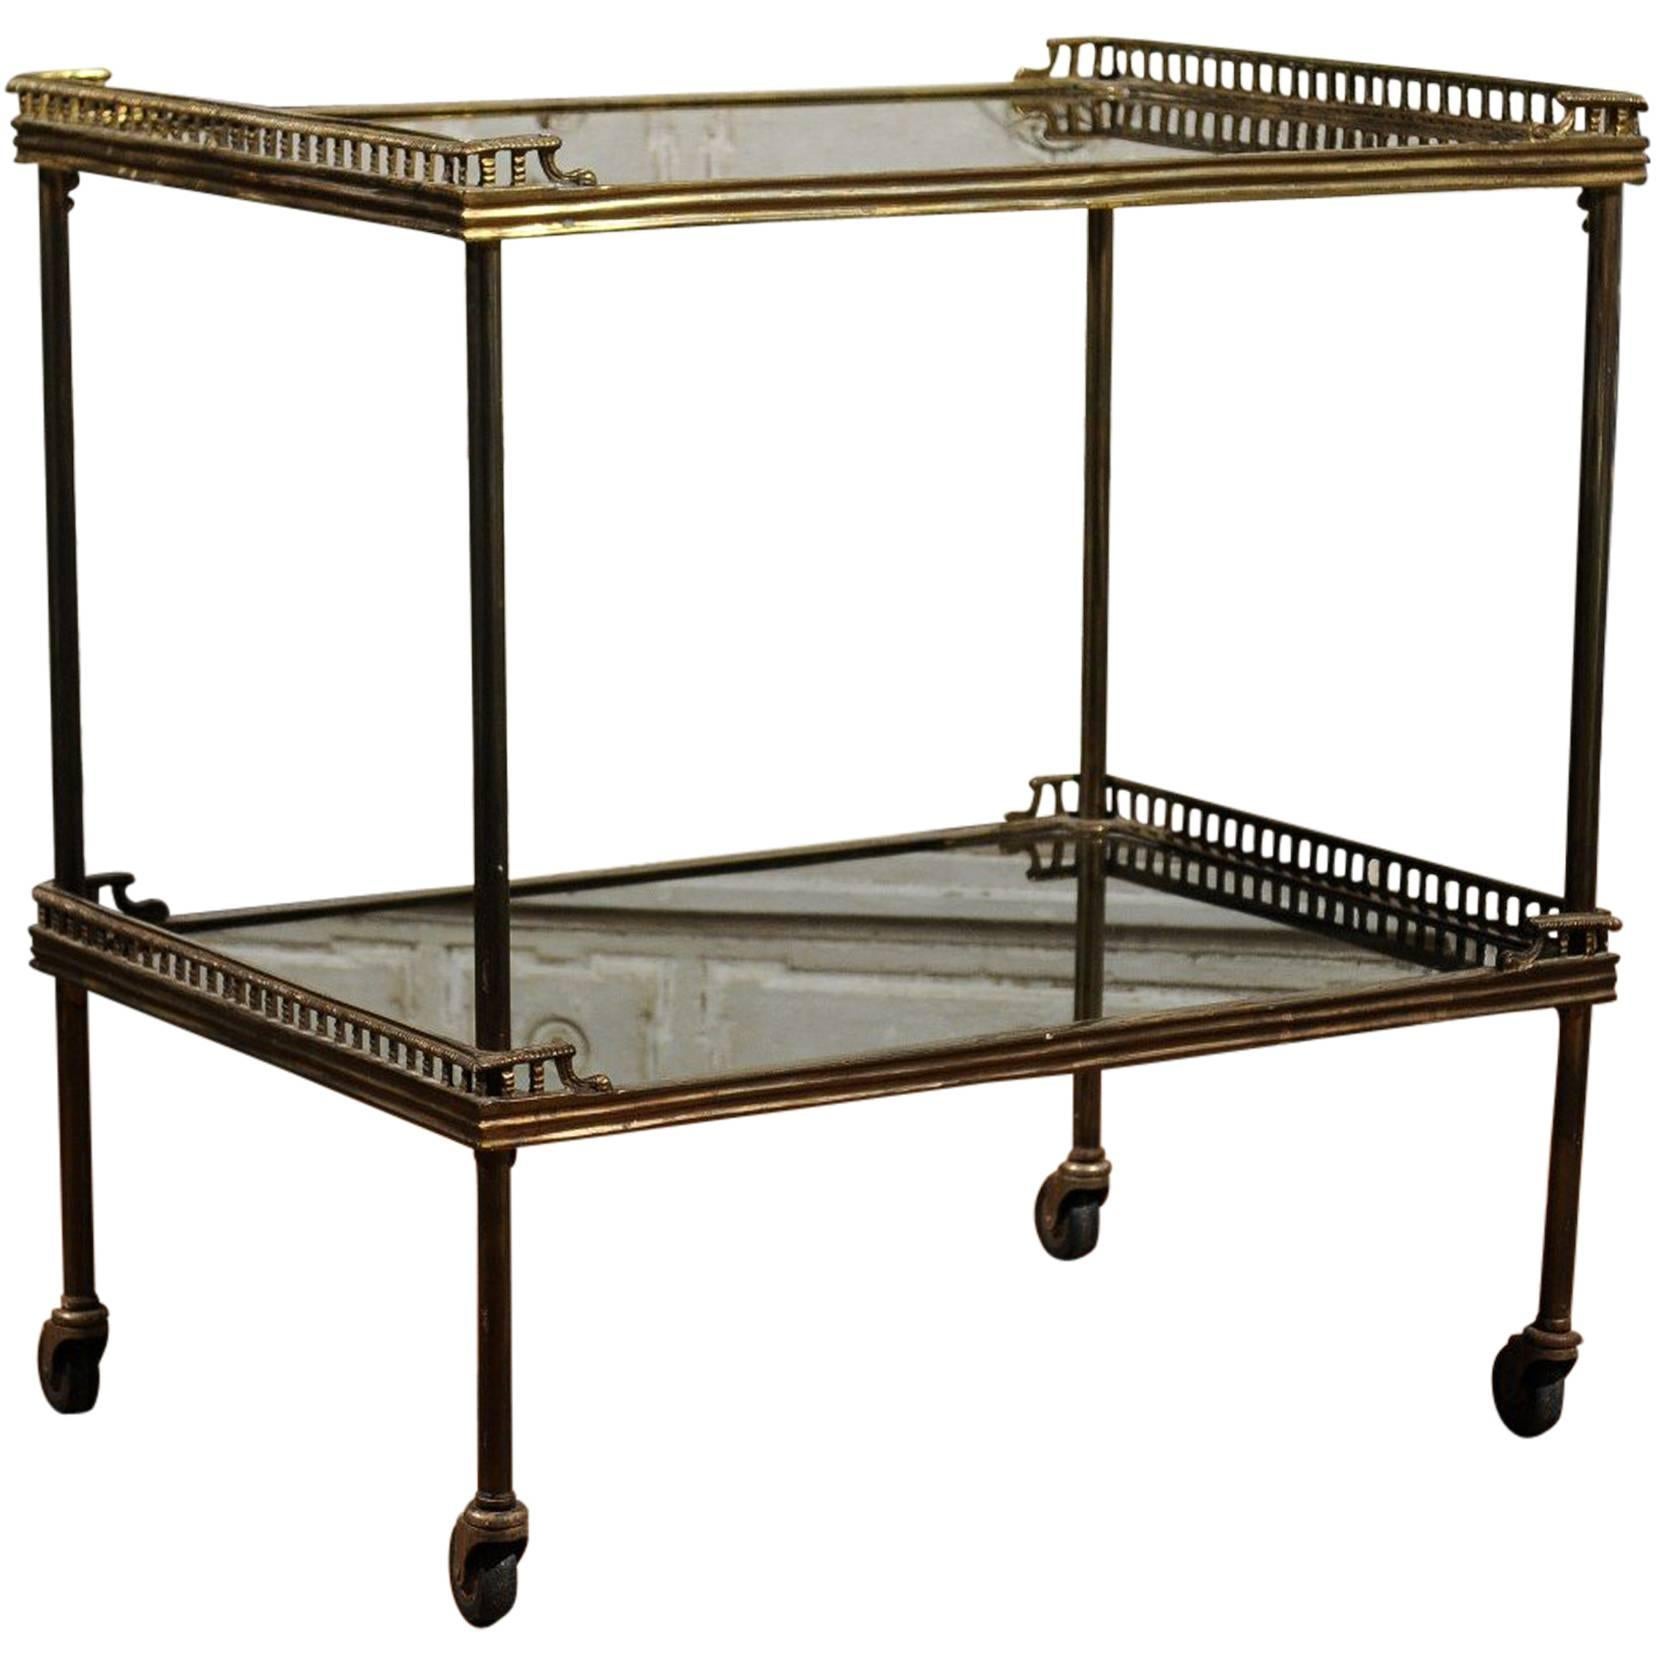 Continental Tiered Brass Trolley on Casters with Mirrored Shelves, circa 1900